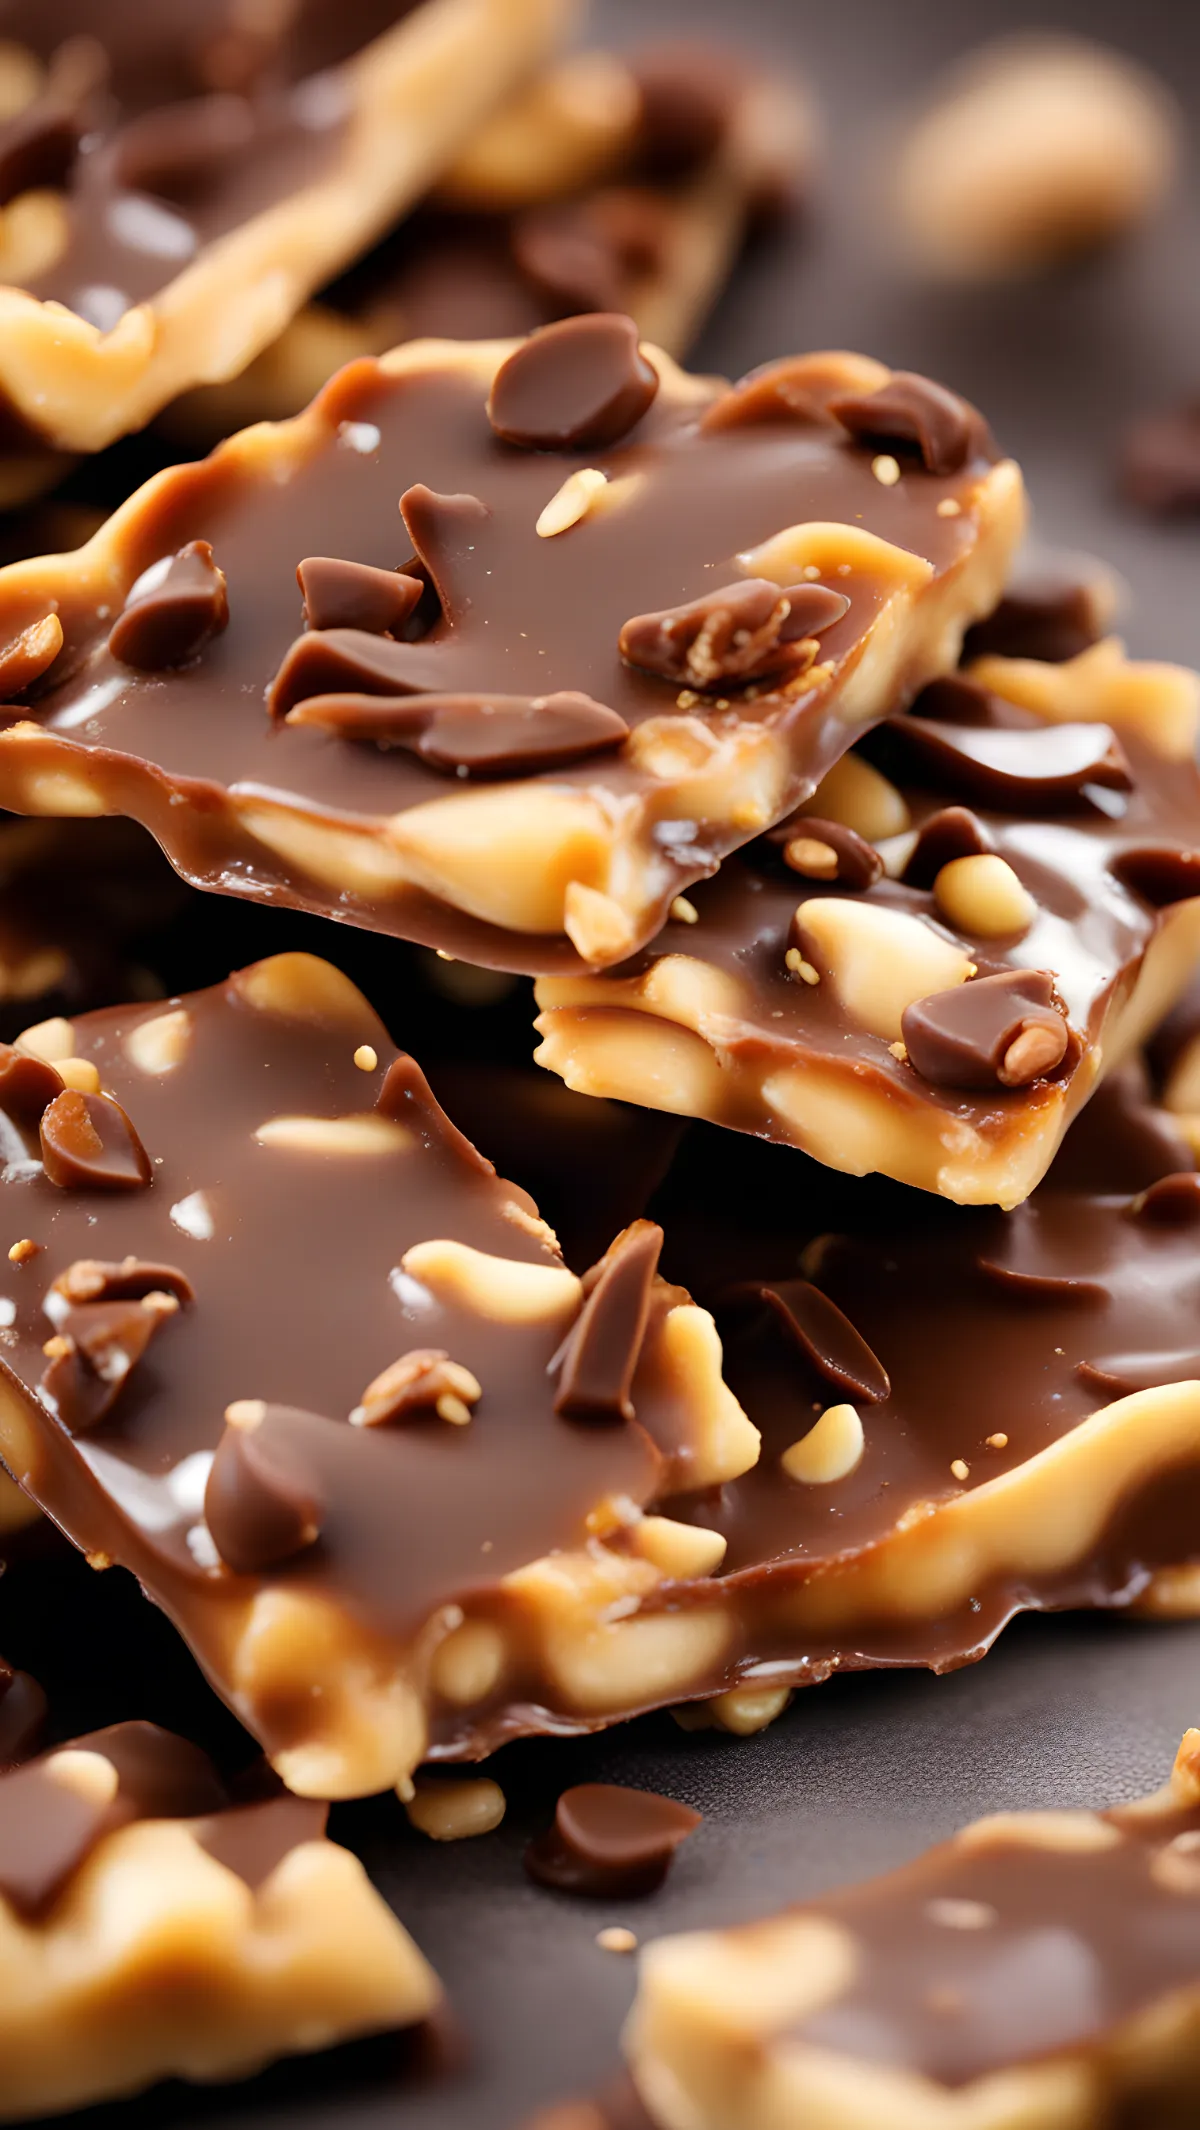 Peanut Brittle Recipe Homemade with 3 Best Sweet Variants